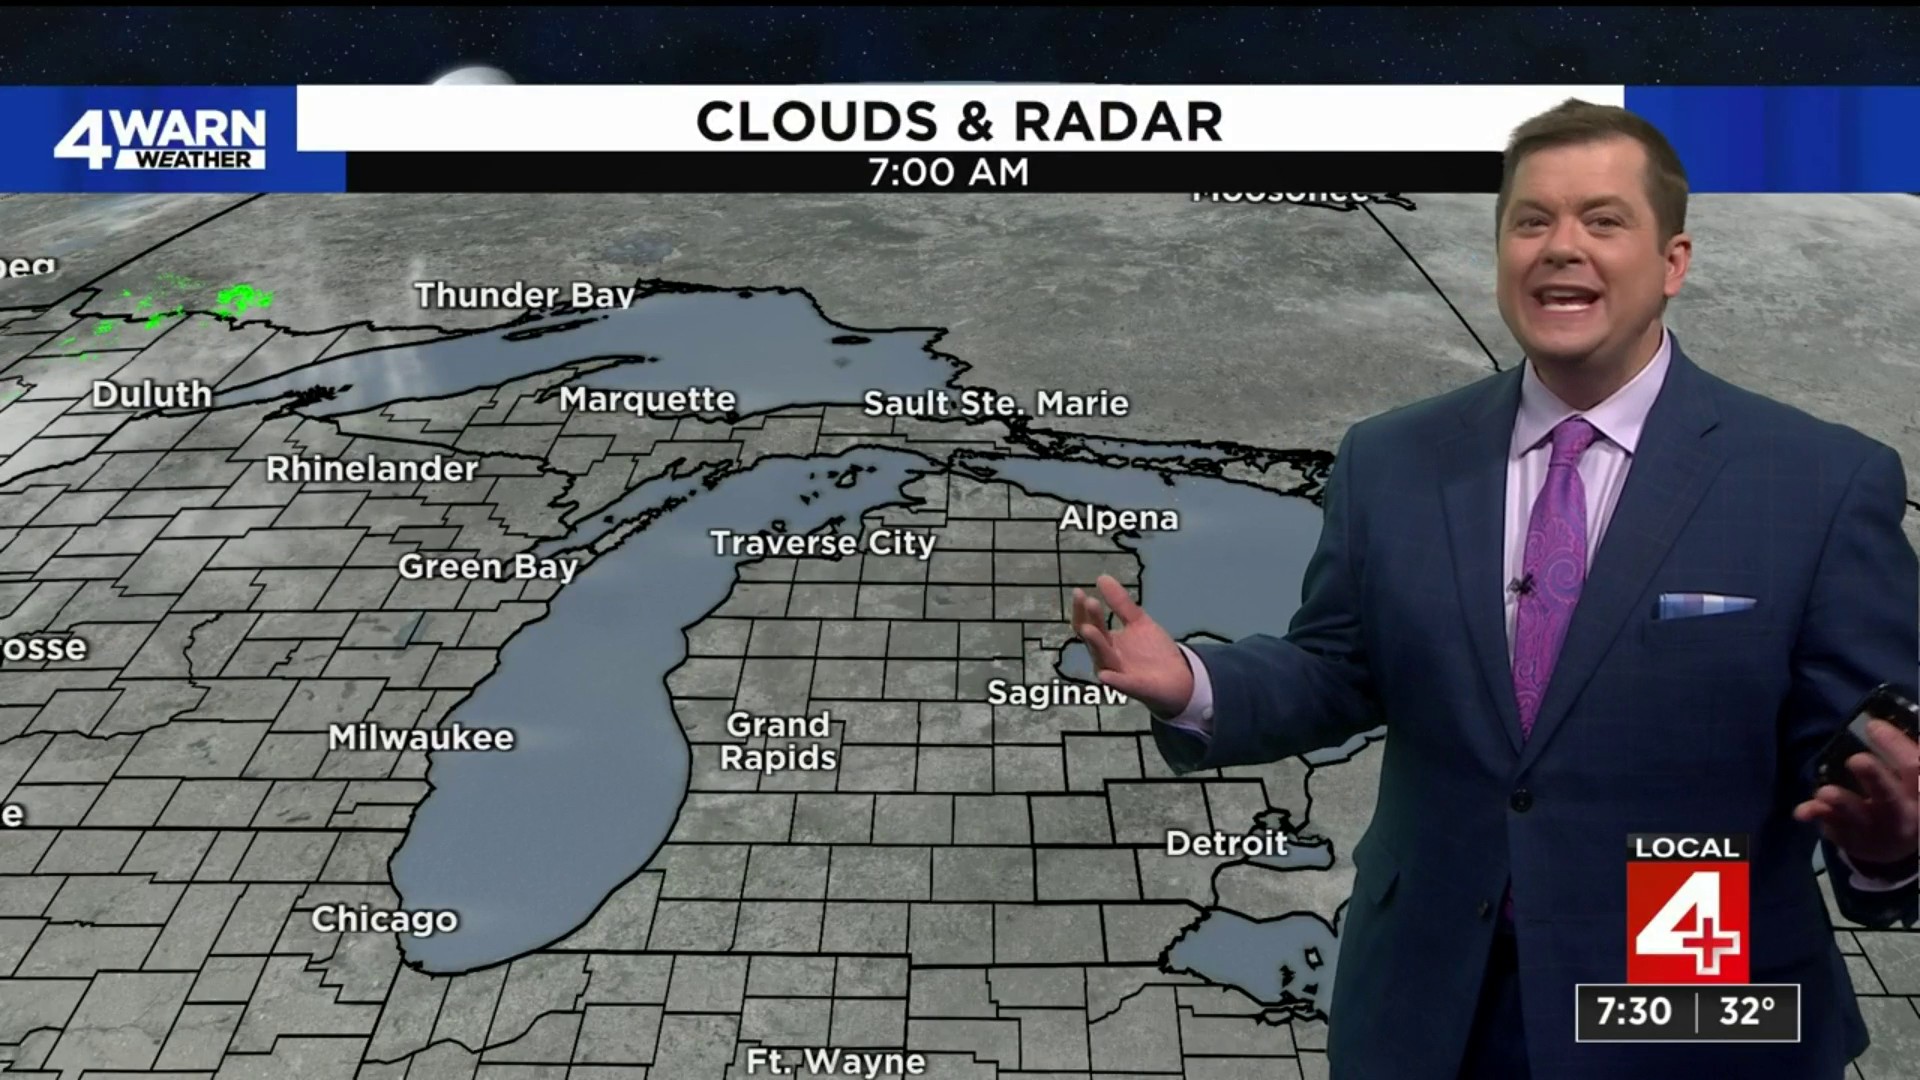 Easter Sunday weather in Metro Detroit: Clear skies, rising temps and potentially patchy fog